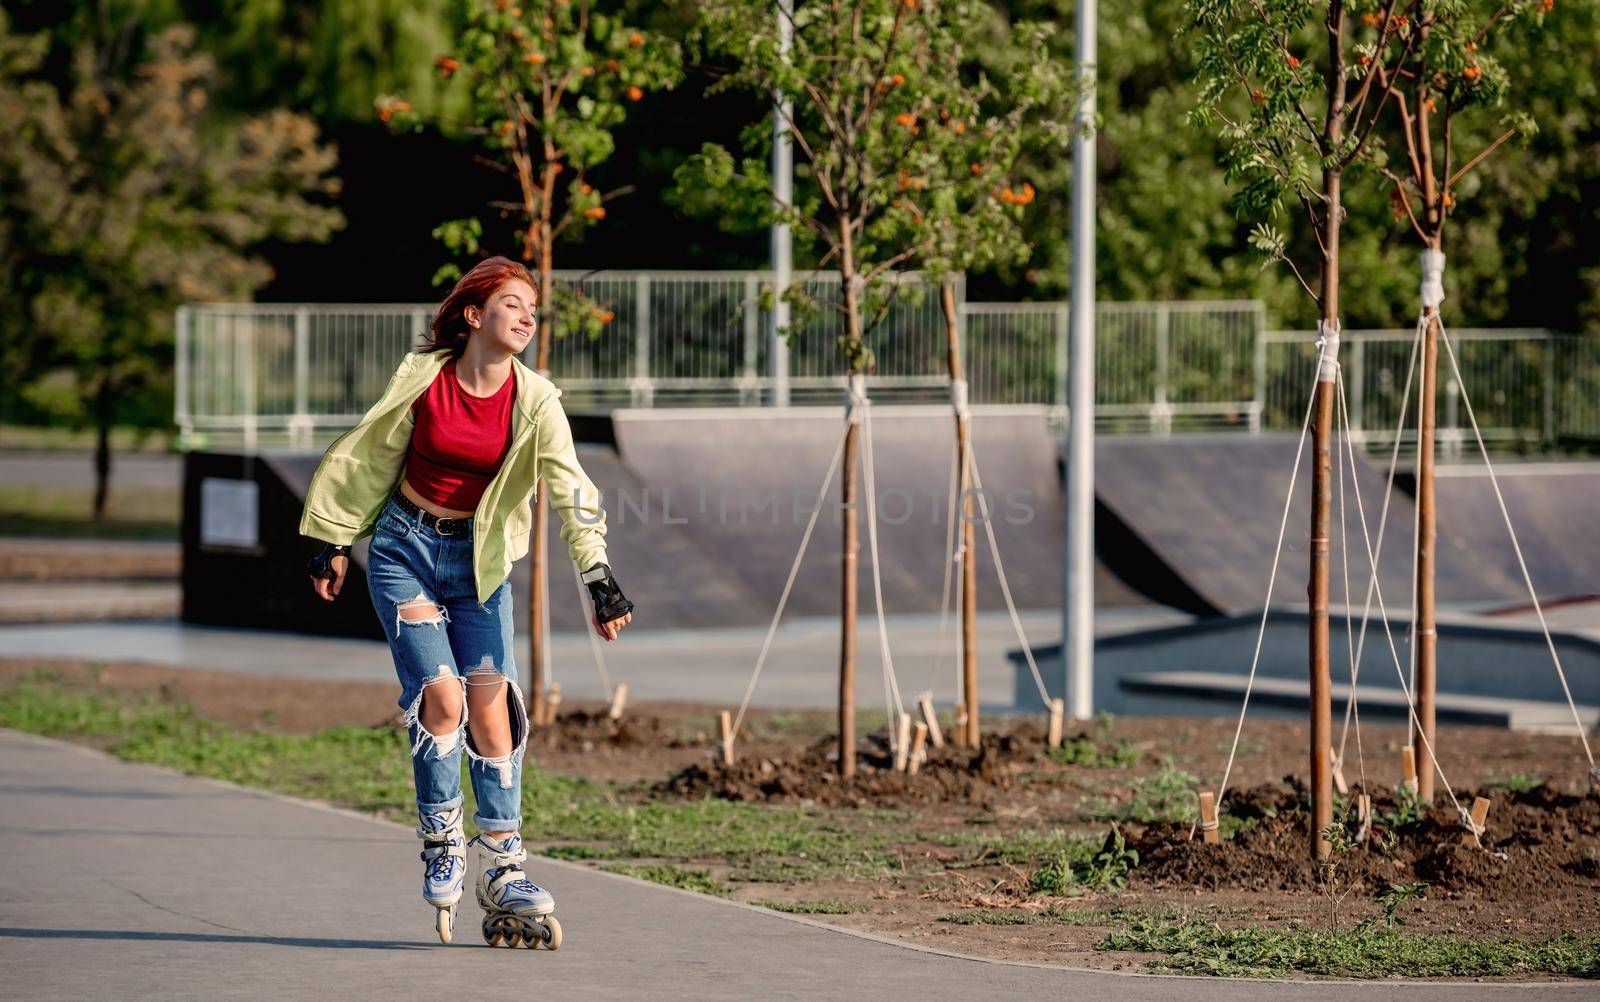 Pretty girl on roller skates enjoying riding in city at summer. Beautiful female teenager rollerblading and happy smiling